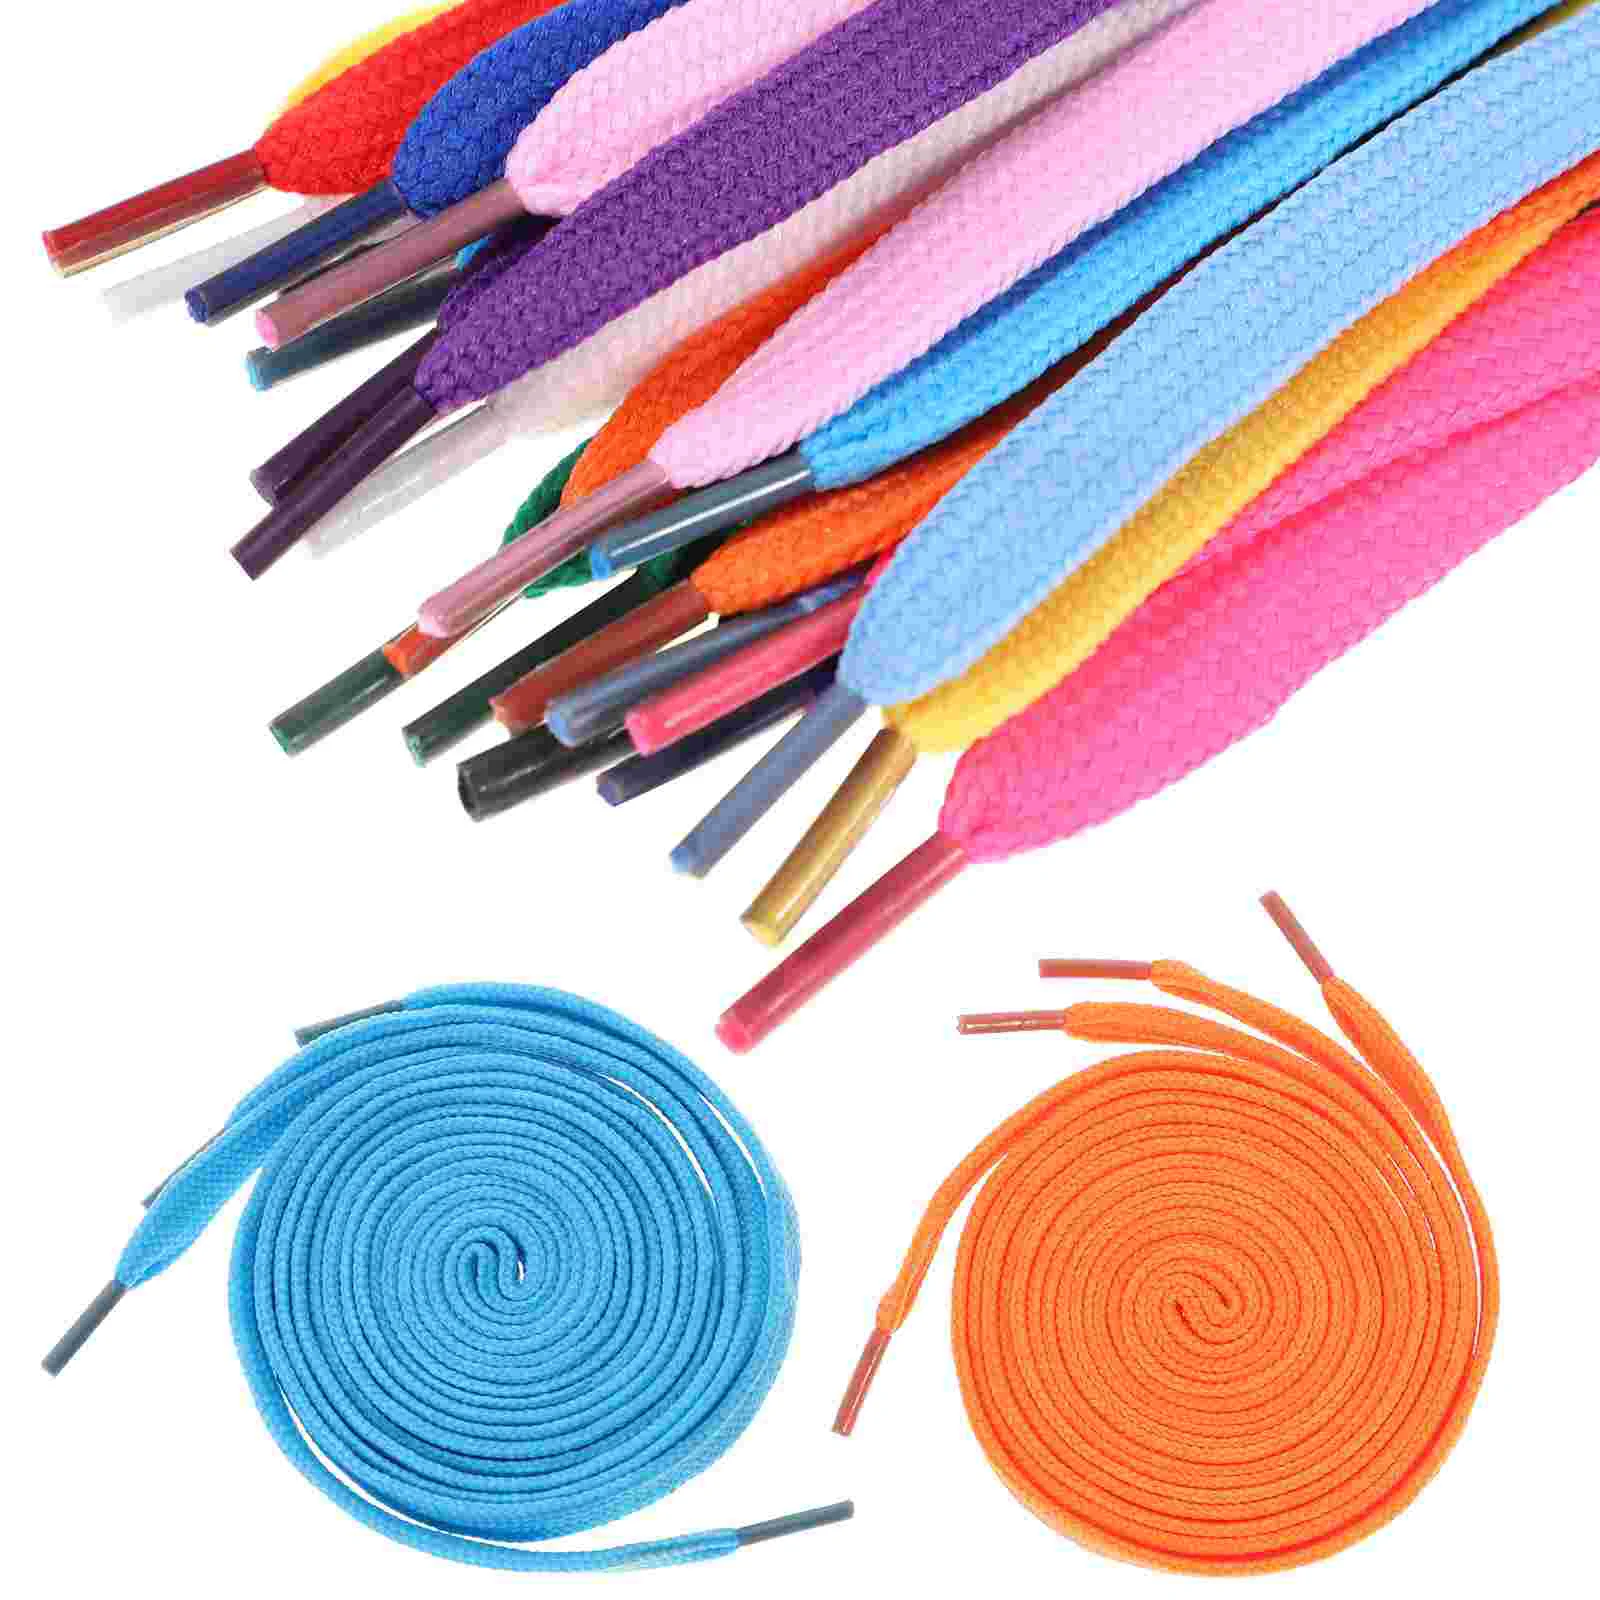 of Replacement Flat Shoelaces Shoe Laces Strings for Sports Shoes /Boots /Sneakers /Skates (Assorted Colors) flat shoelaces sneaker shoe laces strings shoelaces bootlaces sport boot lace athletic shoe string ribbon laces boots printing